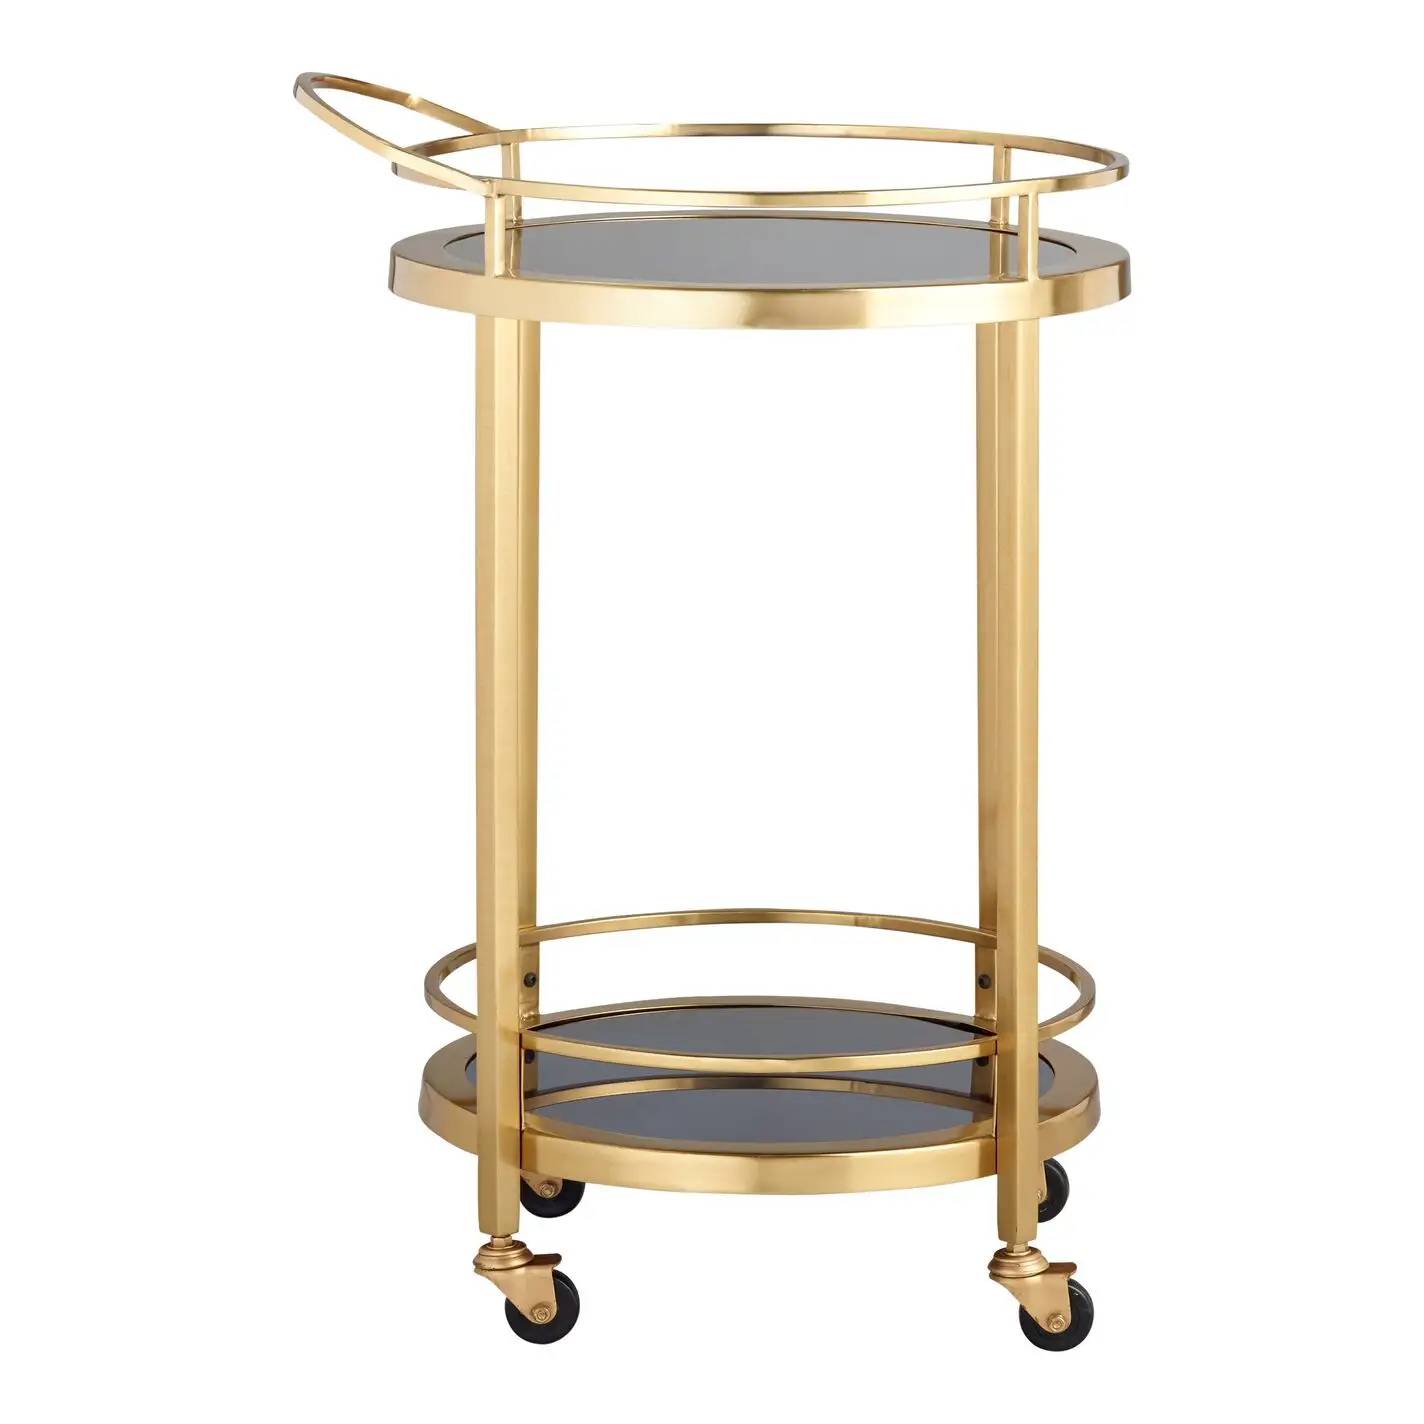 golden plated and black glass serving cart/3 tier bar cart round/barware round bar cart 3 tier serving tea cart in round shape